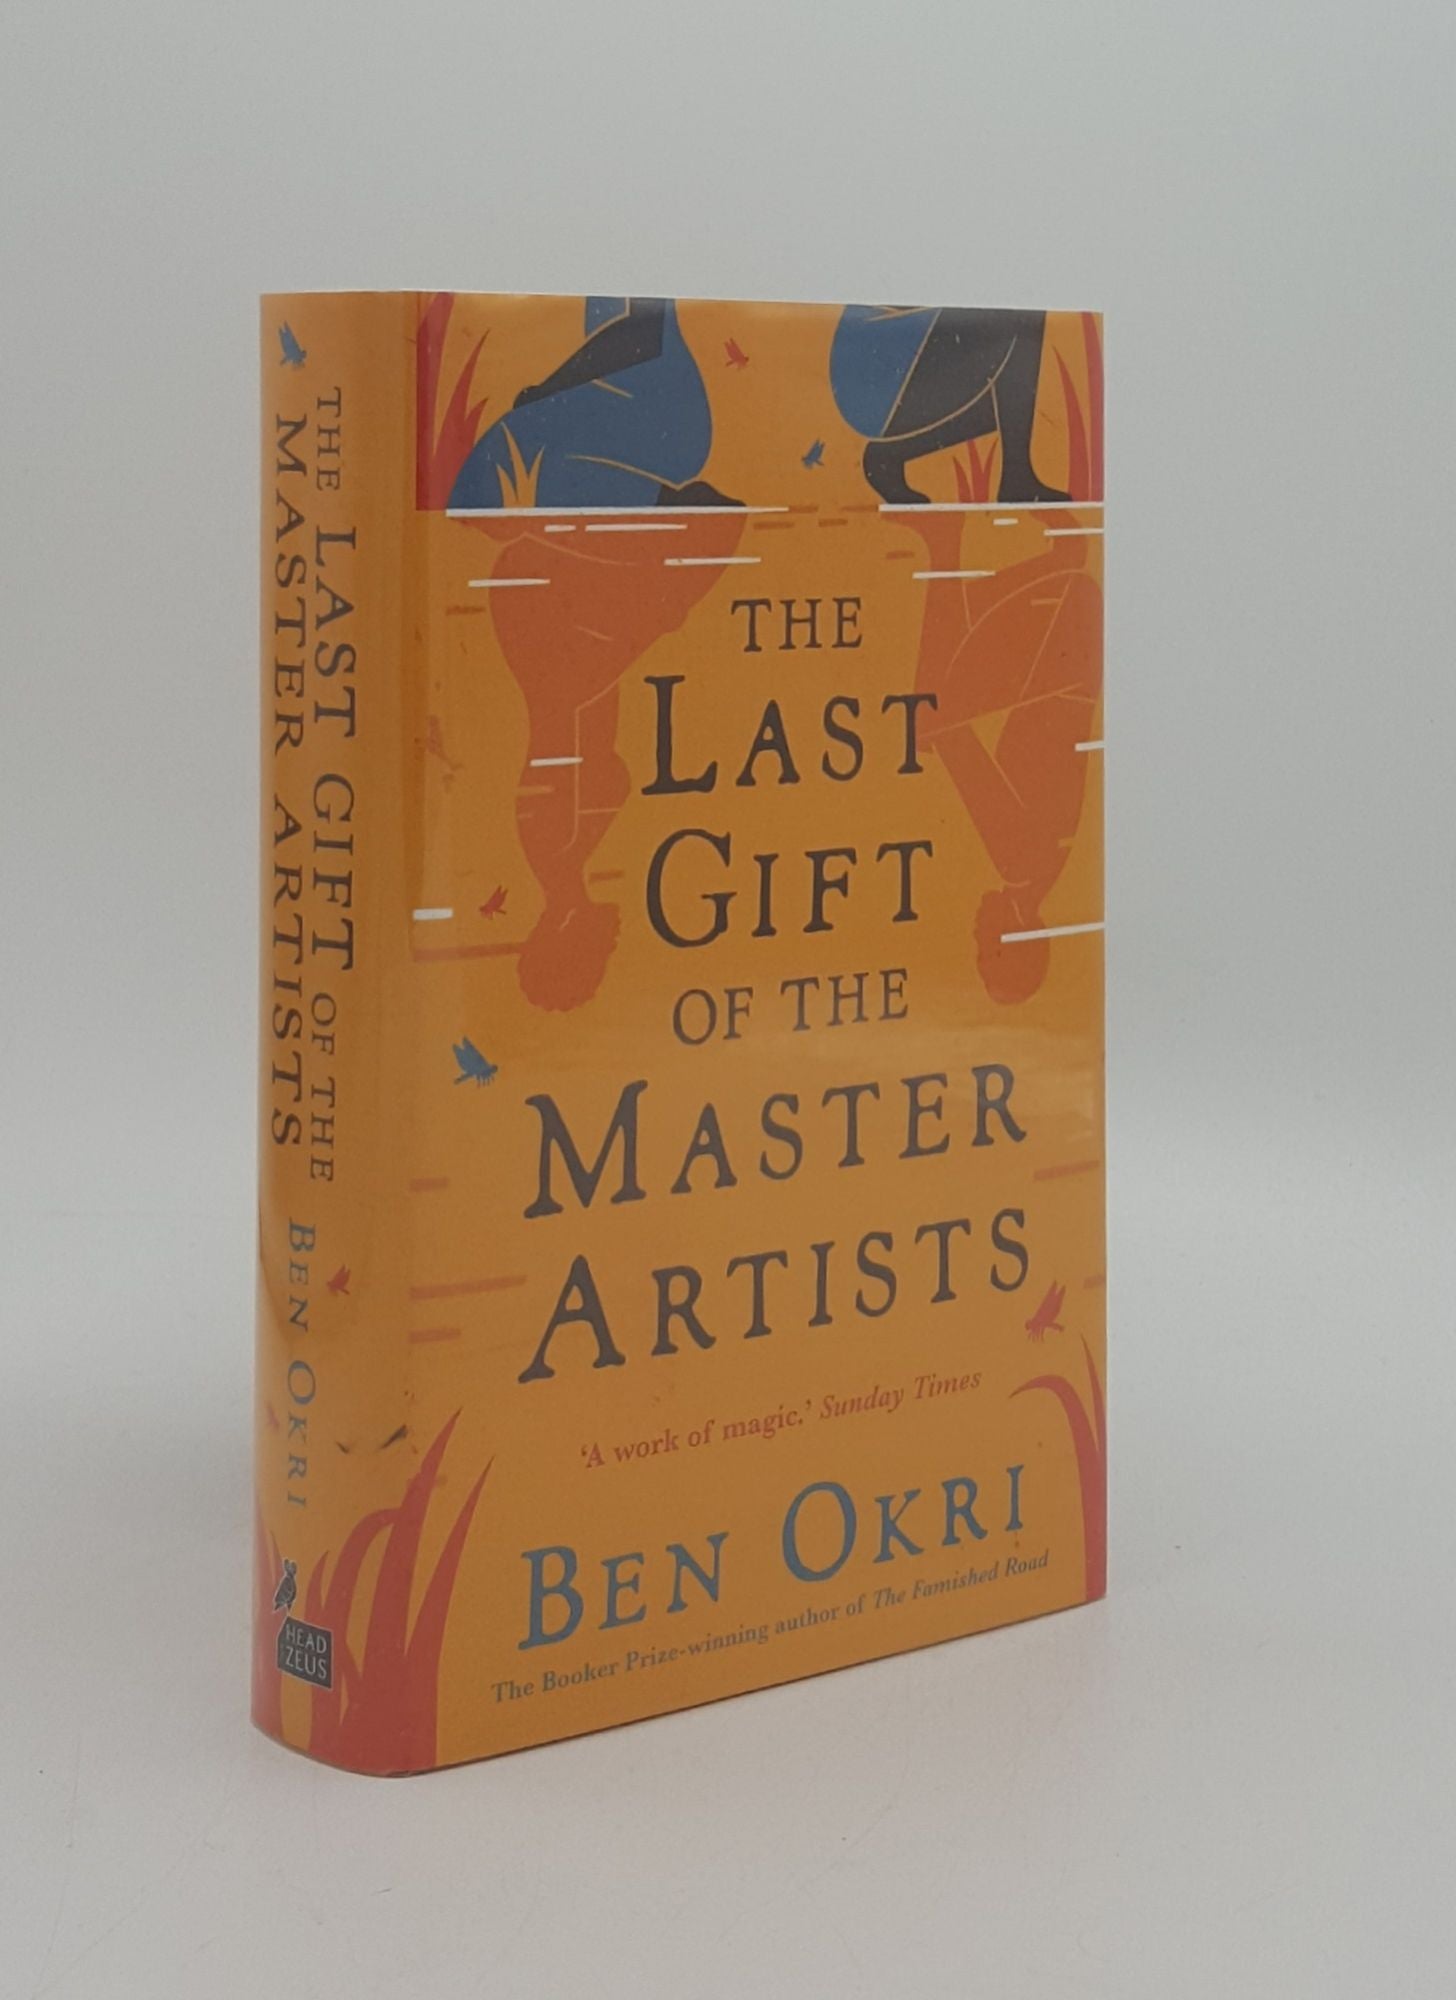 OKRI Ben - The Last Gift of the Master Artists